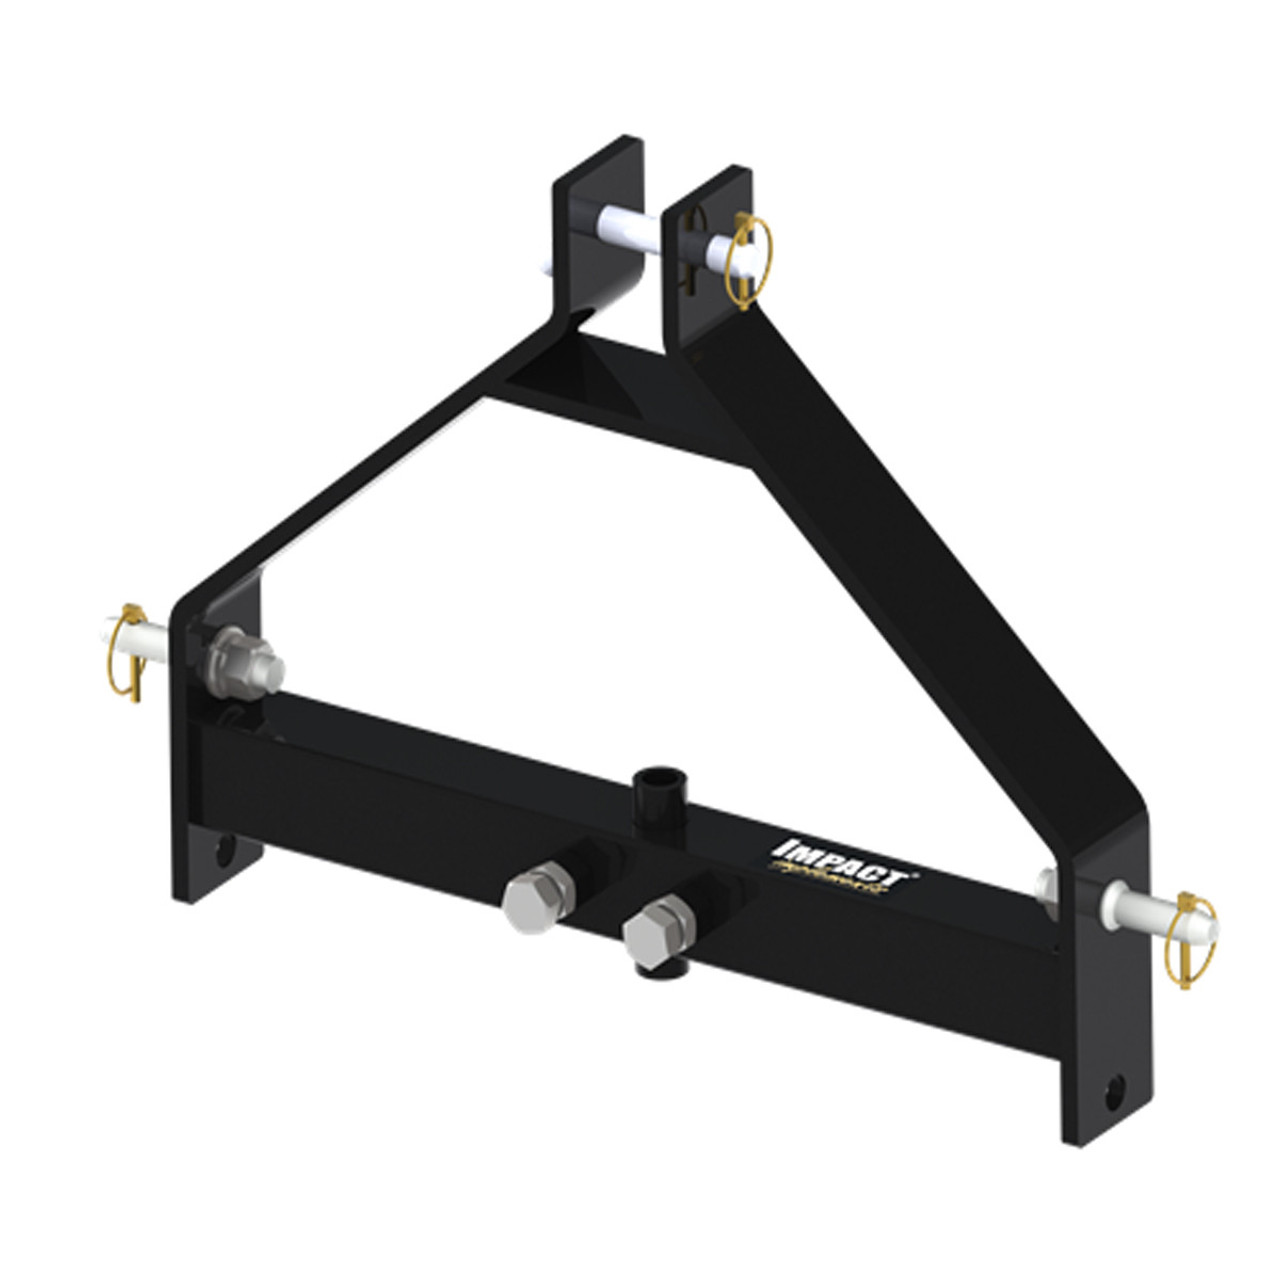 UTV Side X Side IMPACT Pro 3-Point Adapter to Sleeve Hitch